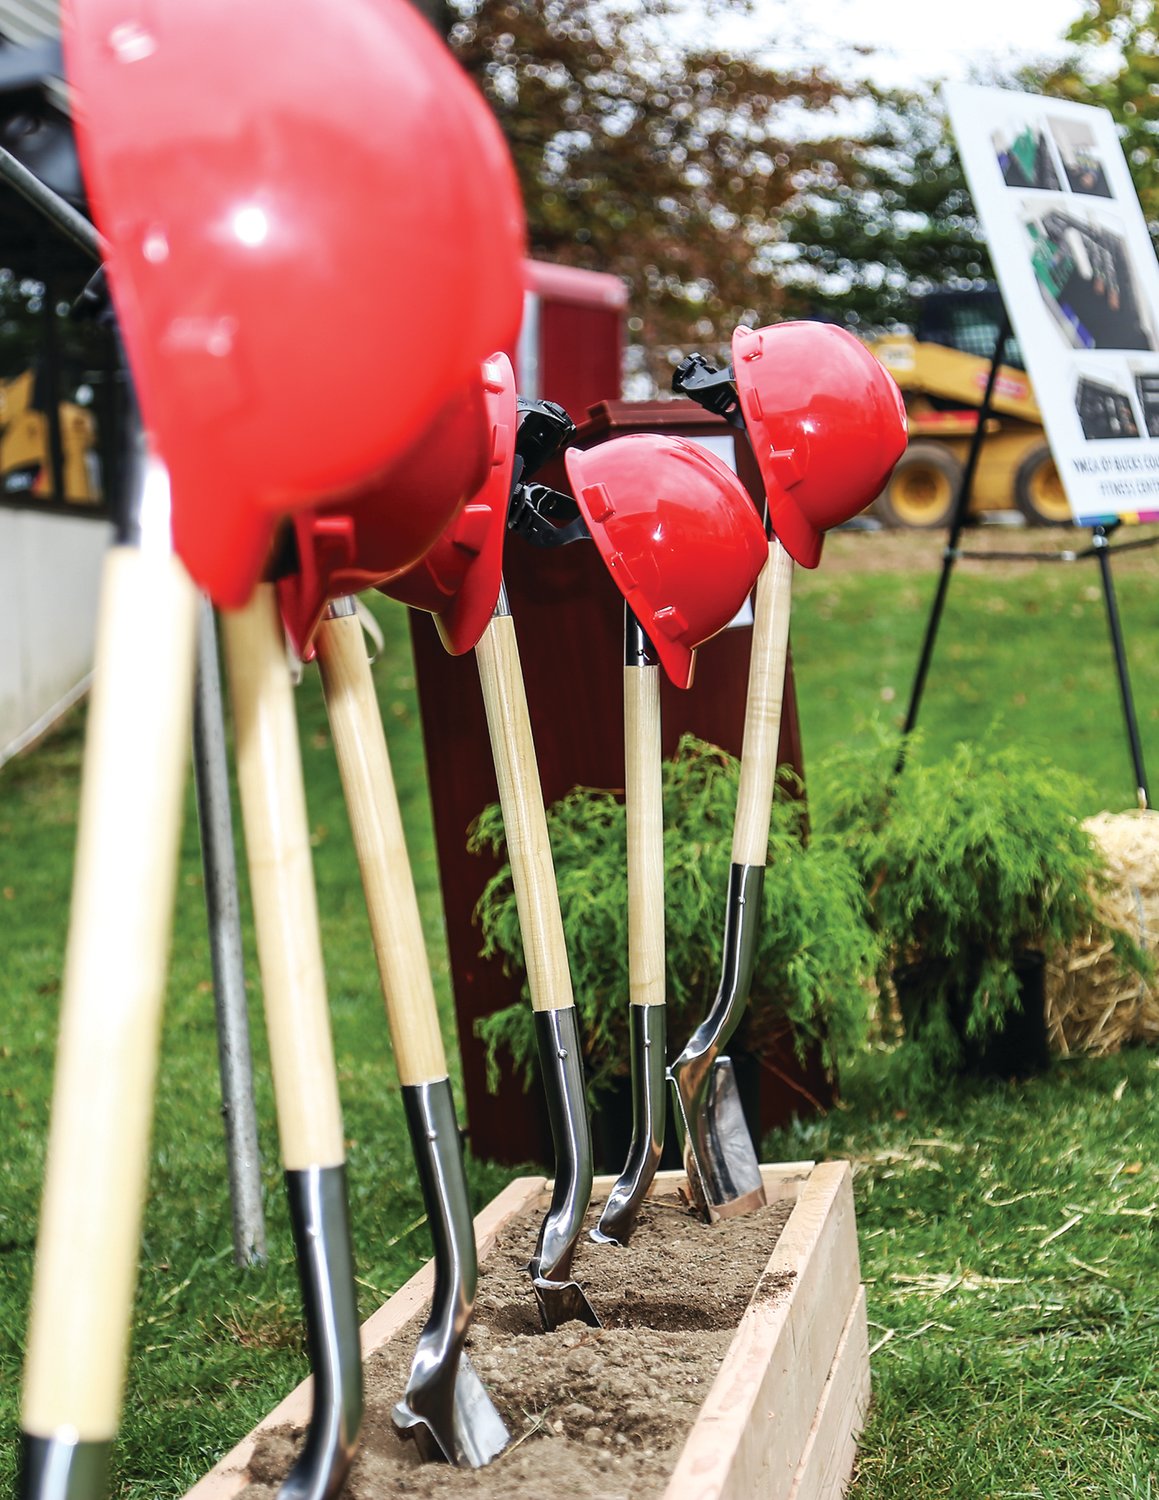 Hard hats and shovels are lined up for the groundbreaking at the YMCA Doylestown branch. The Y is adding space for a larger fitness center and locker rooms.